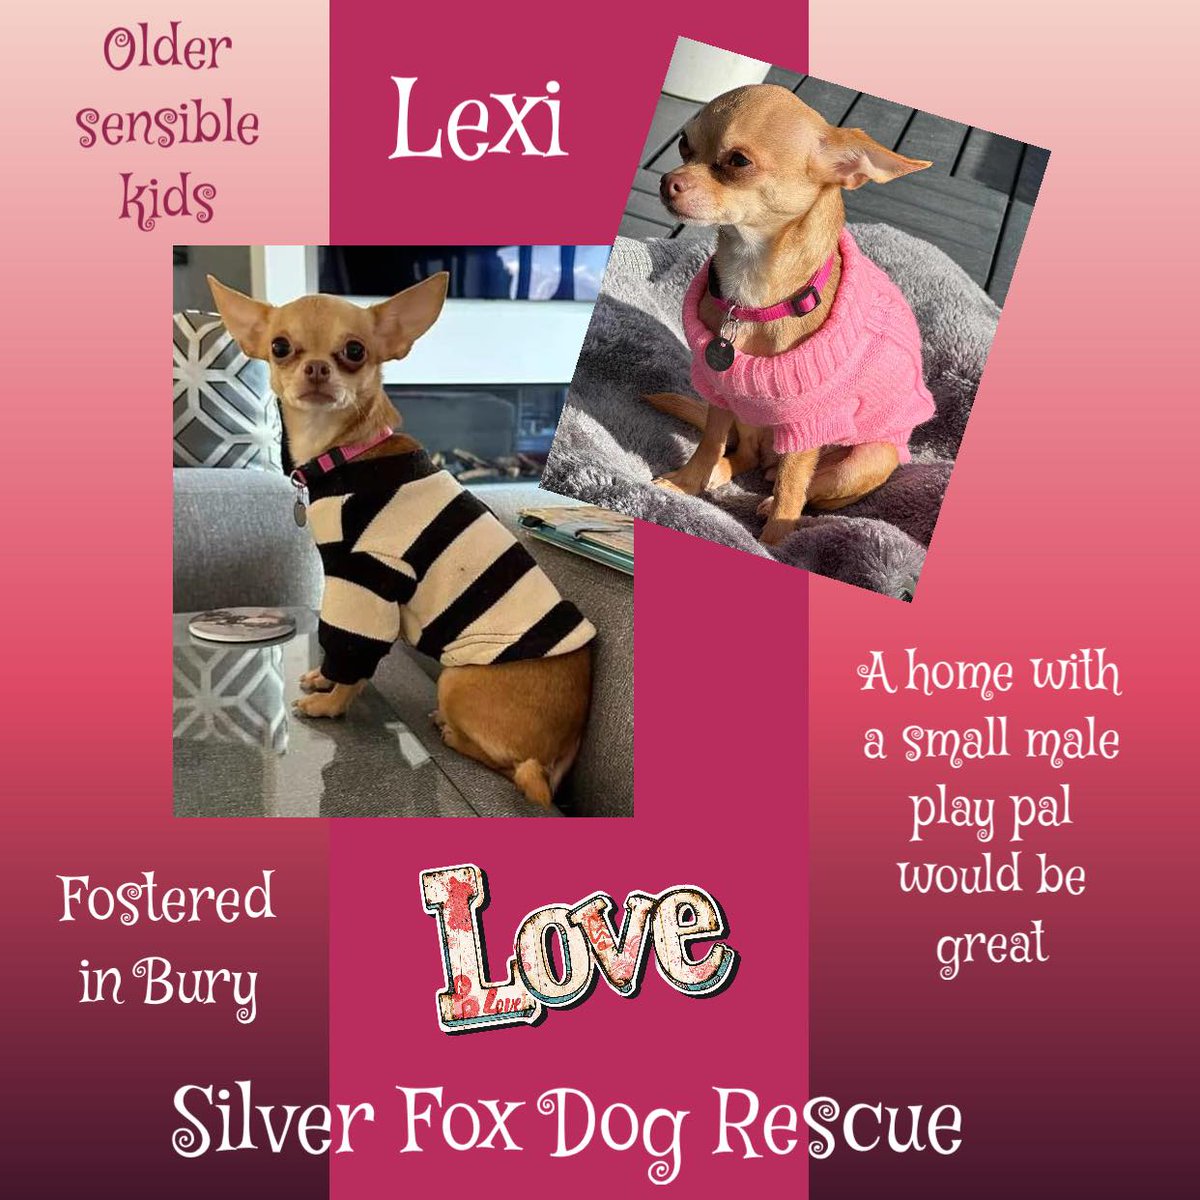 4yo Chihuahua LEXI is fostered in #Bury & looking hard for a family to call her very own. She is a small girl who has been known to have disagreements with some bitches, so is looking for a home with at least one other small size, male dog of a similar age, who also enjoys…